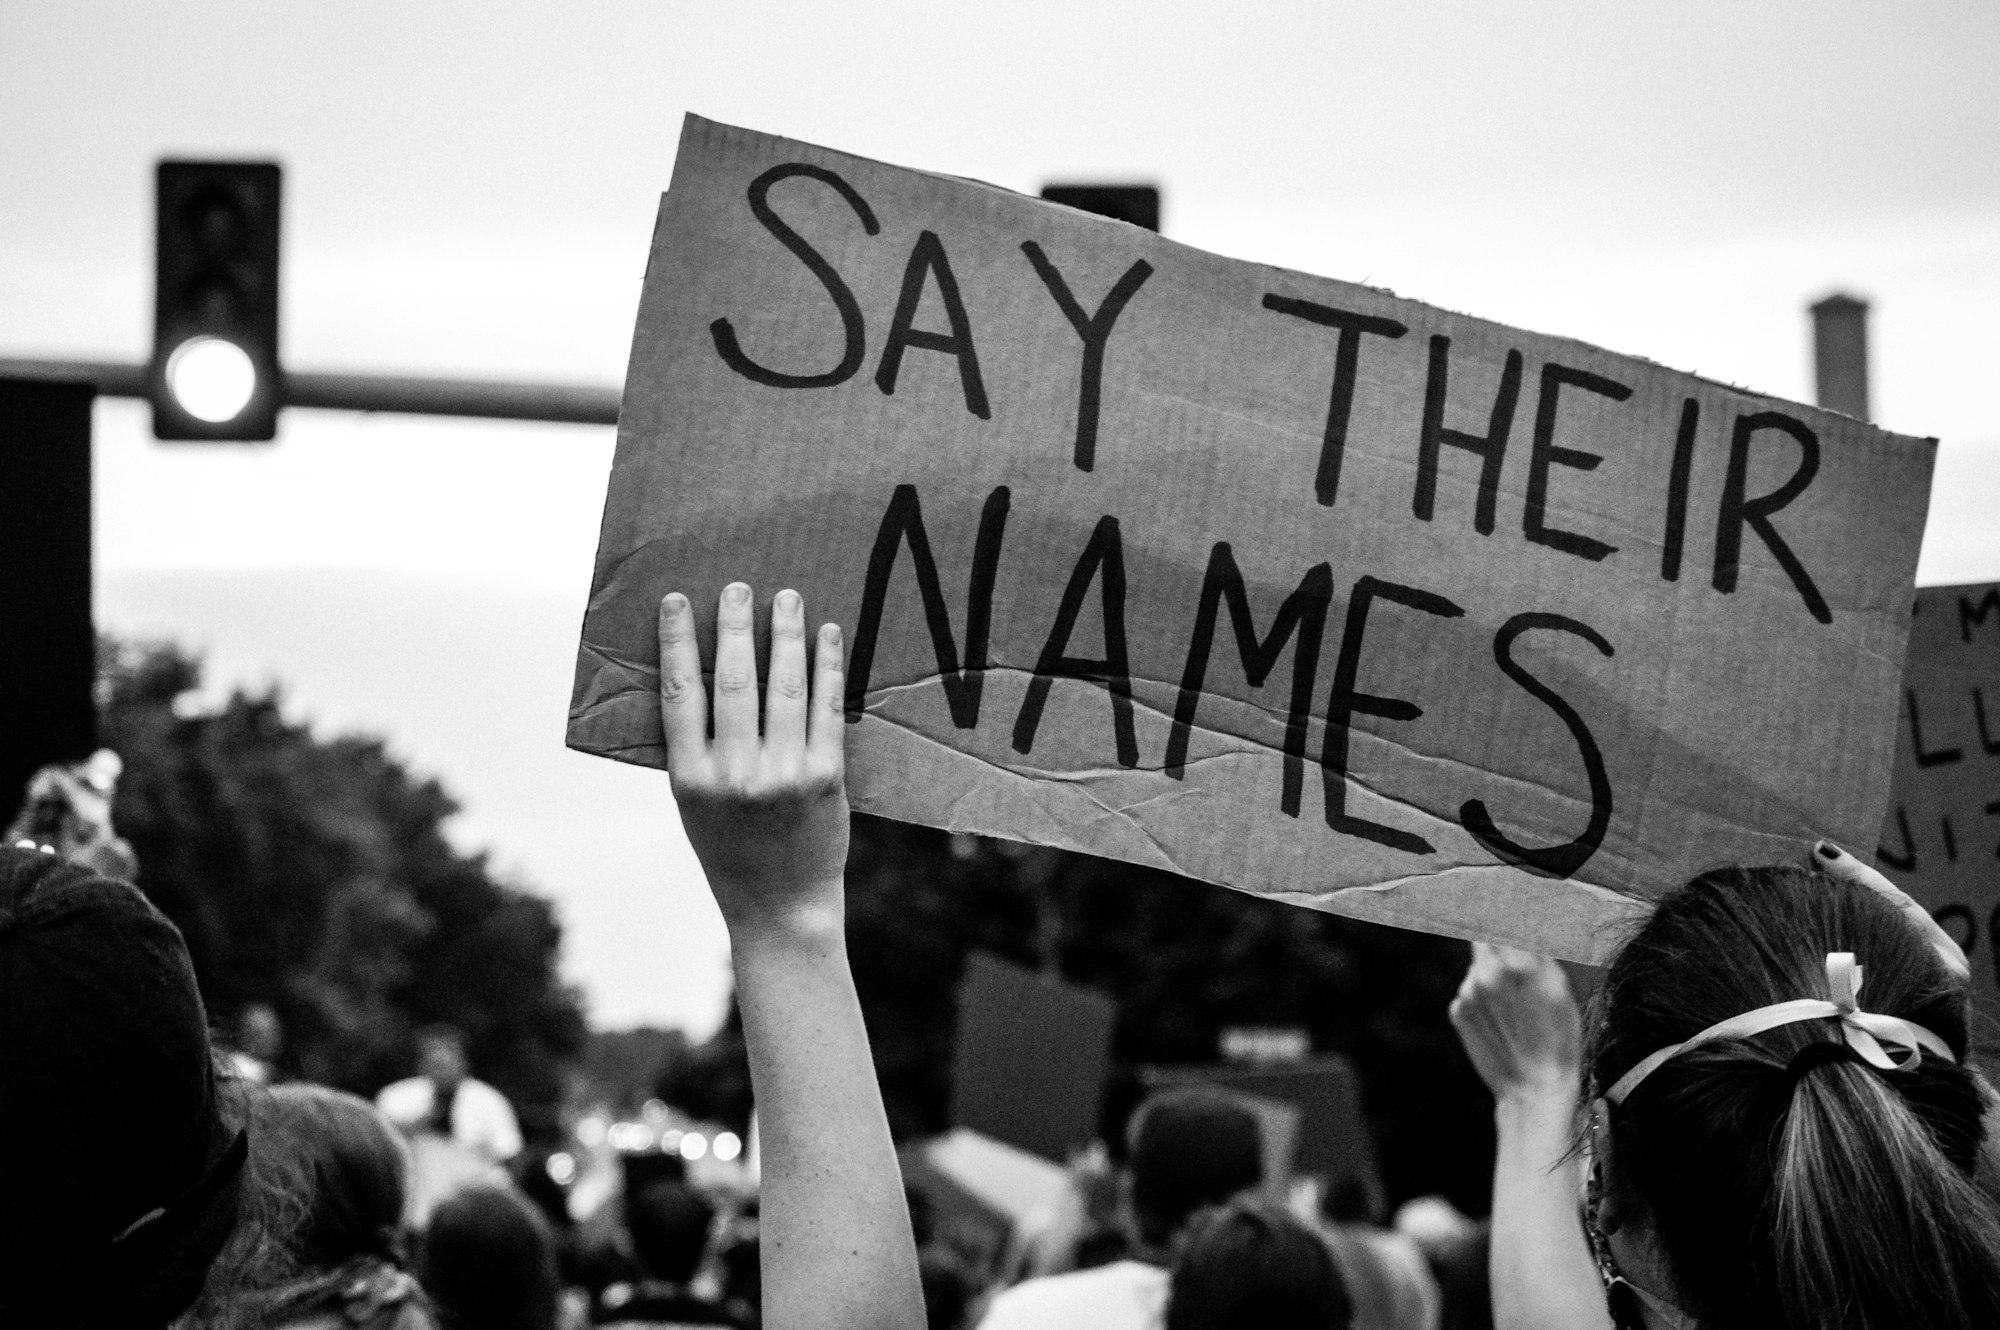 black lives matter protest, holding a sign that says "say their names"